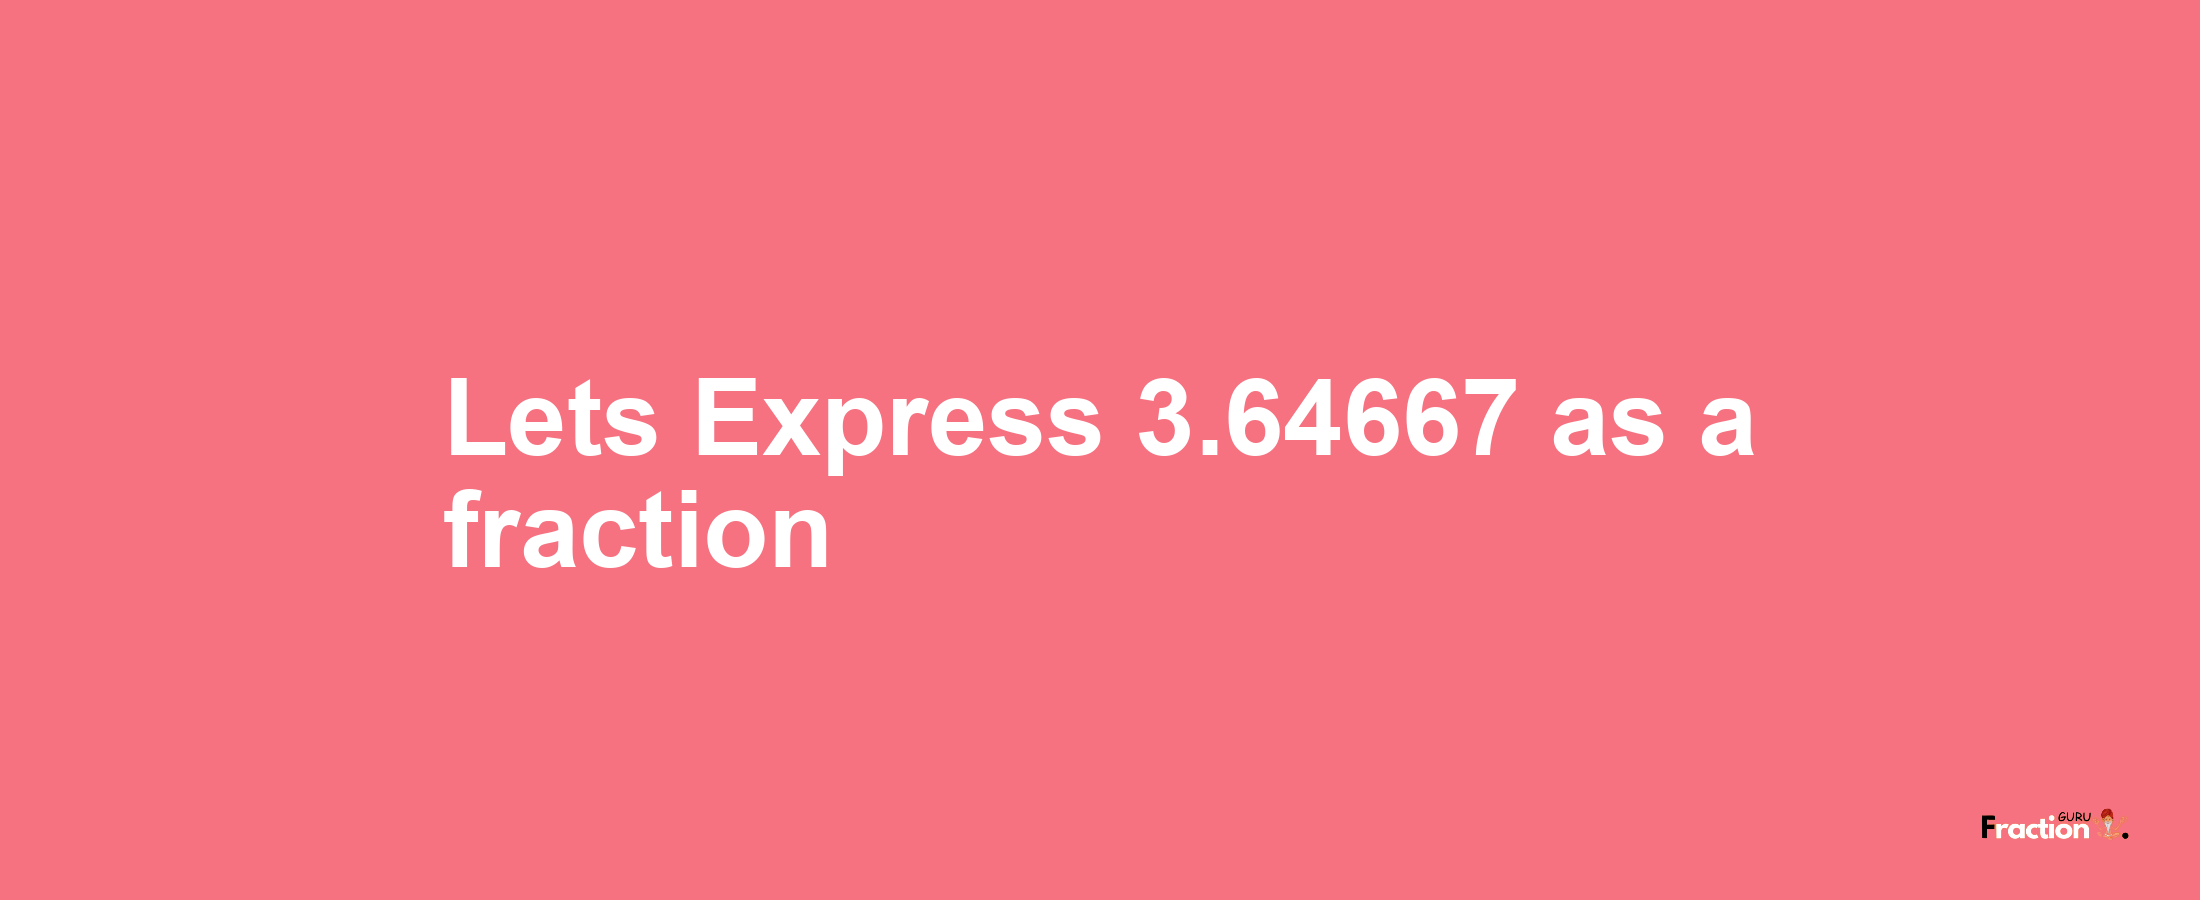 Lets Express 3.64667 as afraction